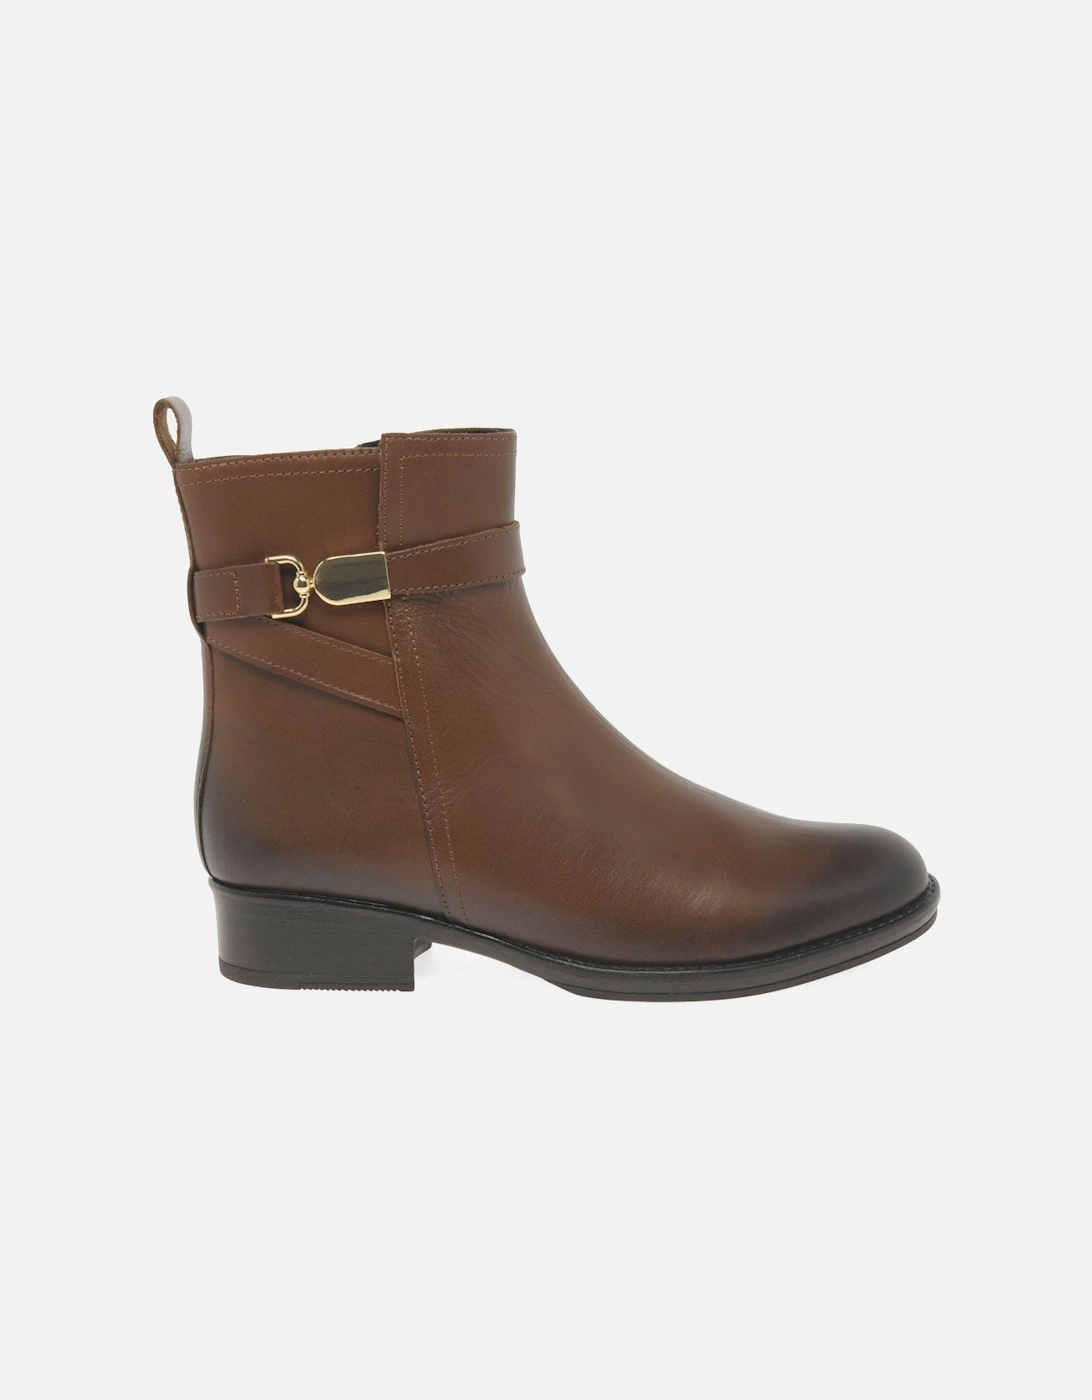 Anika Womens Ankle Boots